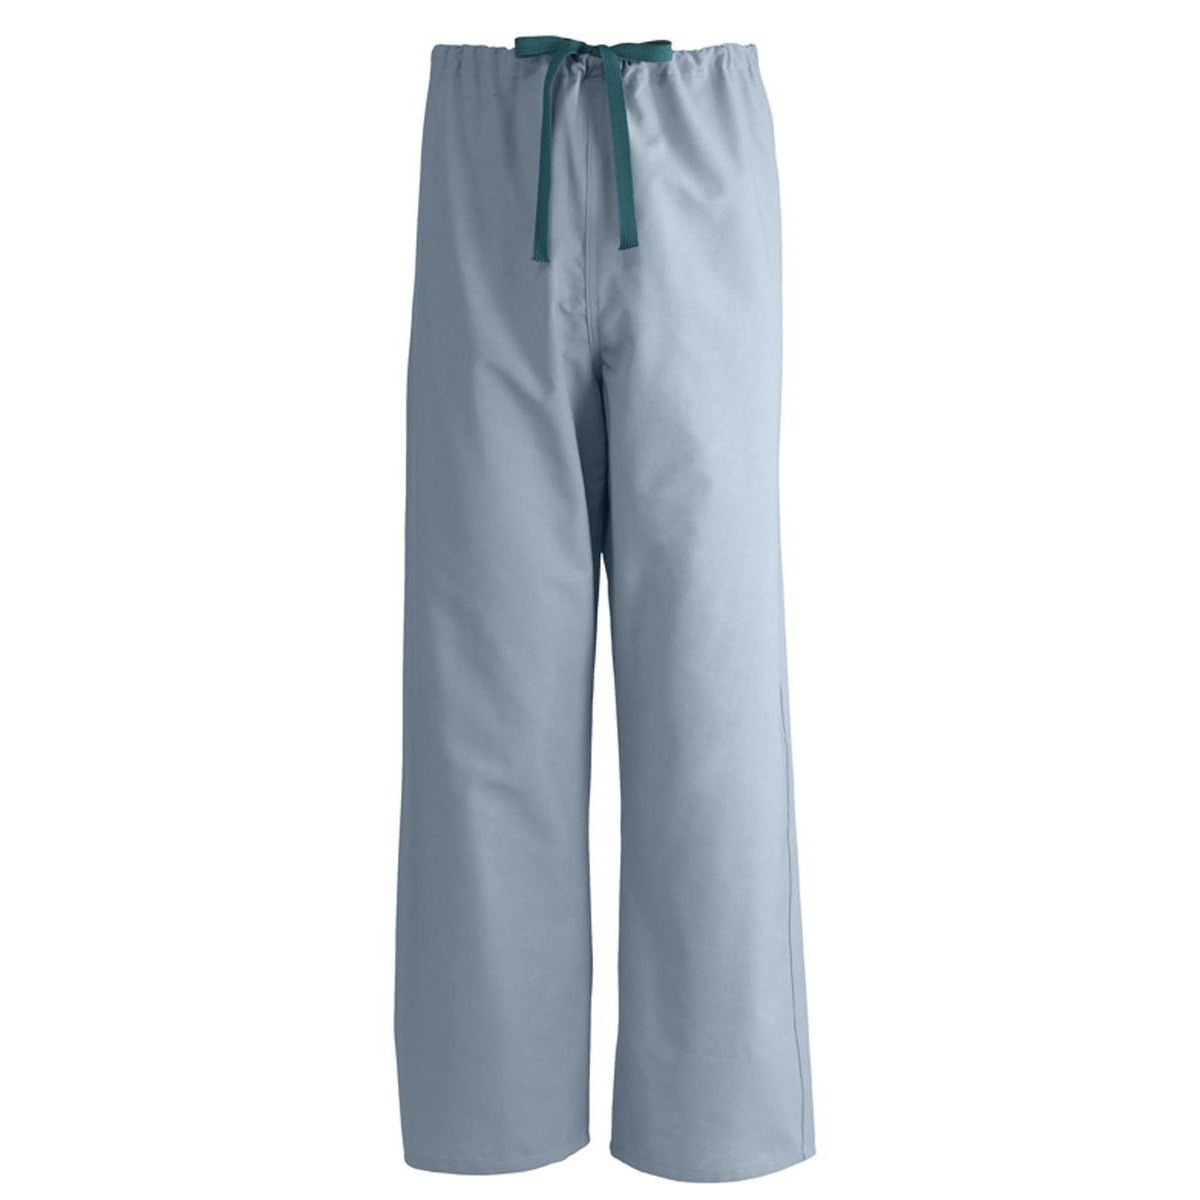 Can you describe the features of the misty green scrubs by EconoBlen, specifically the unisex reversible scrub pants?